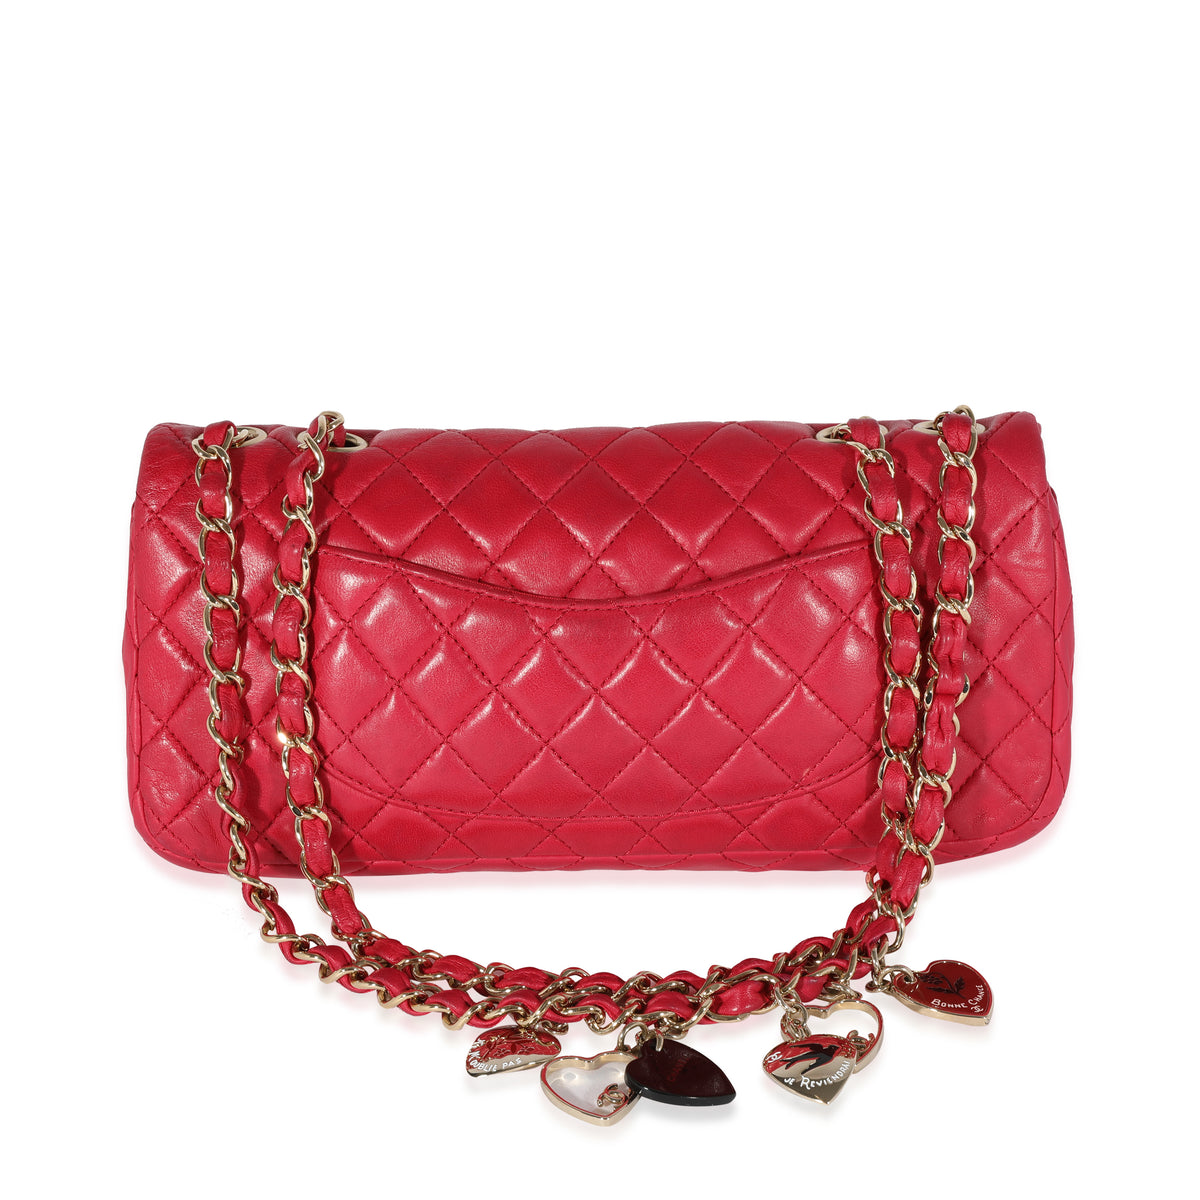 Chanel Red Quilted Lambskin Valentine's Day East West Single Flap Bag, myGemma, SG